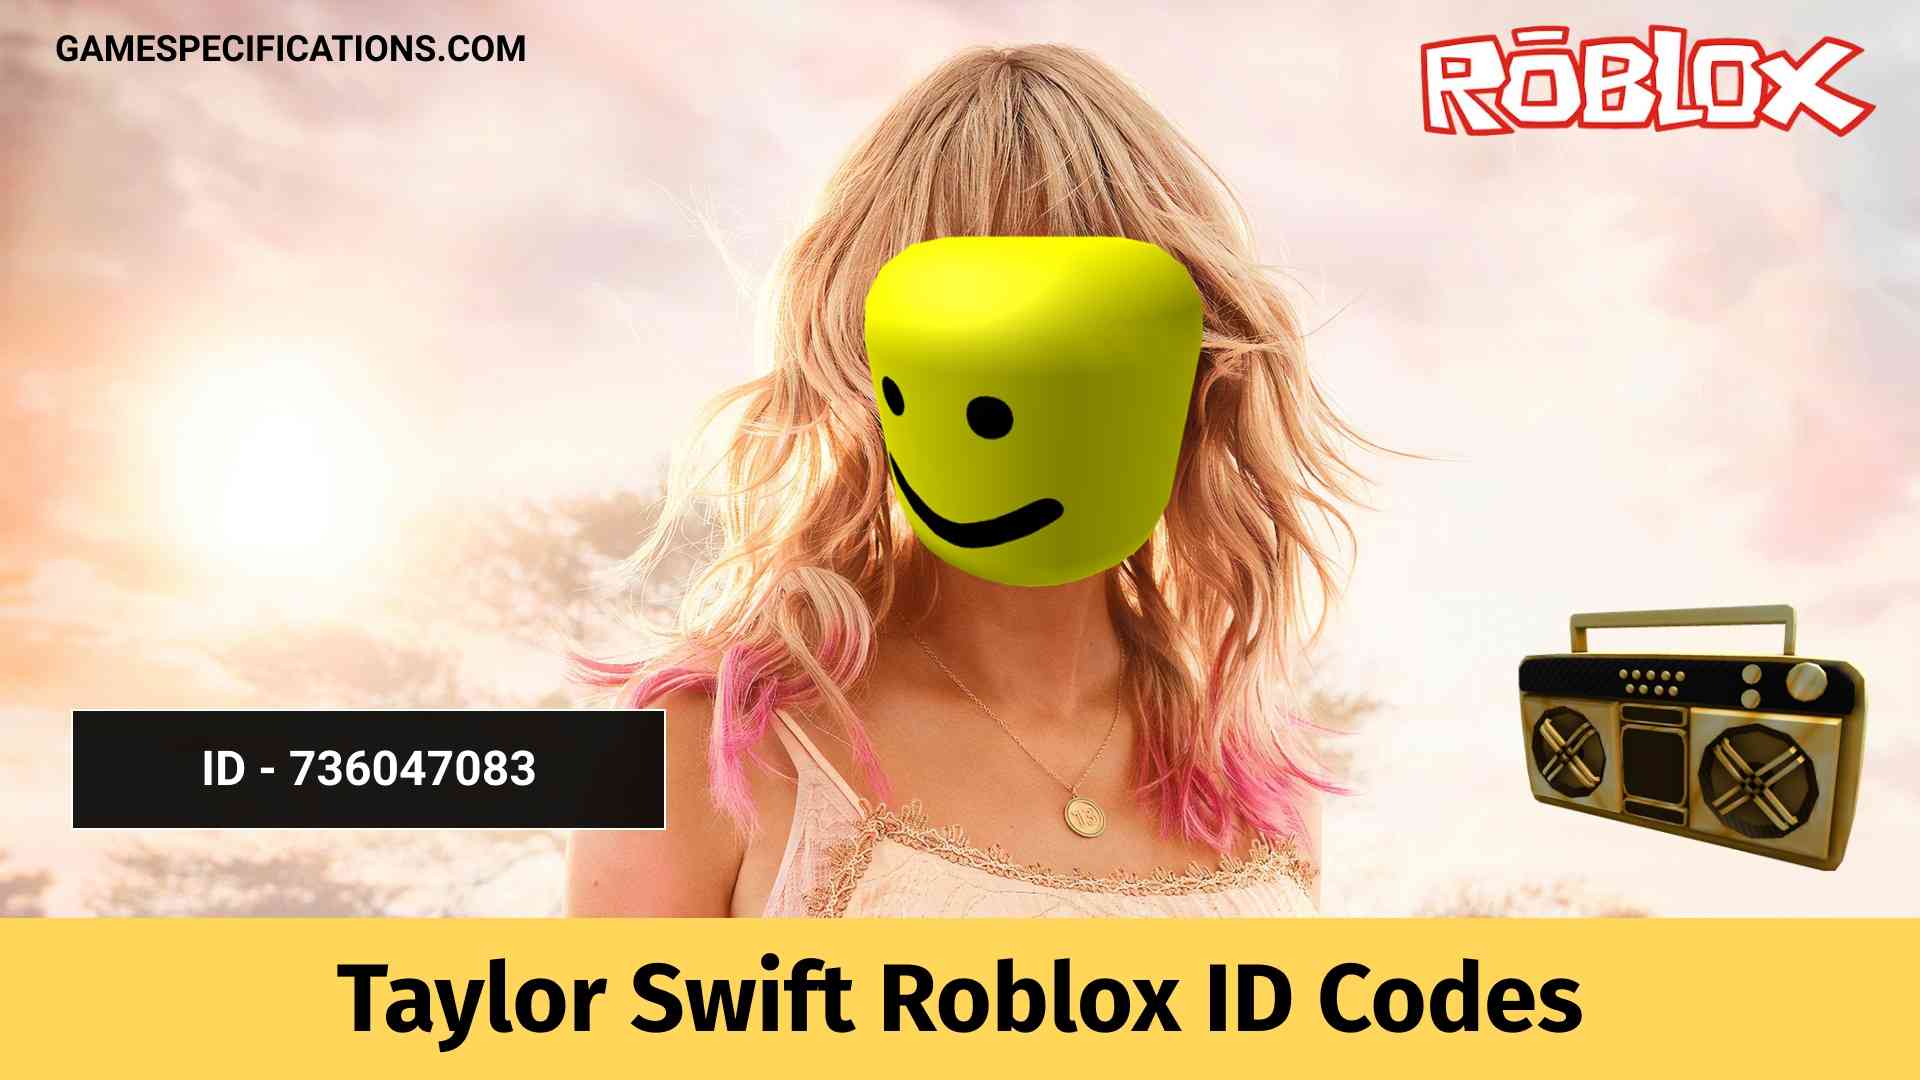 Taylor Swift Roblox Id Codes To Play Pop Songs 2021 Game Specifications - how to get a free boombox on roblox